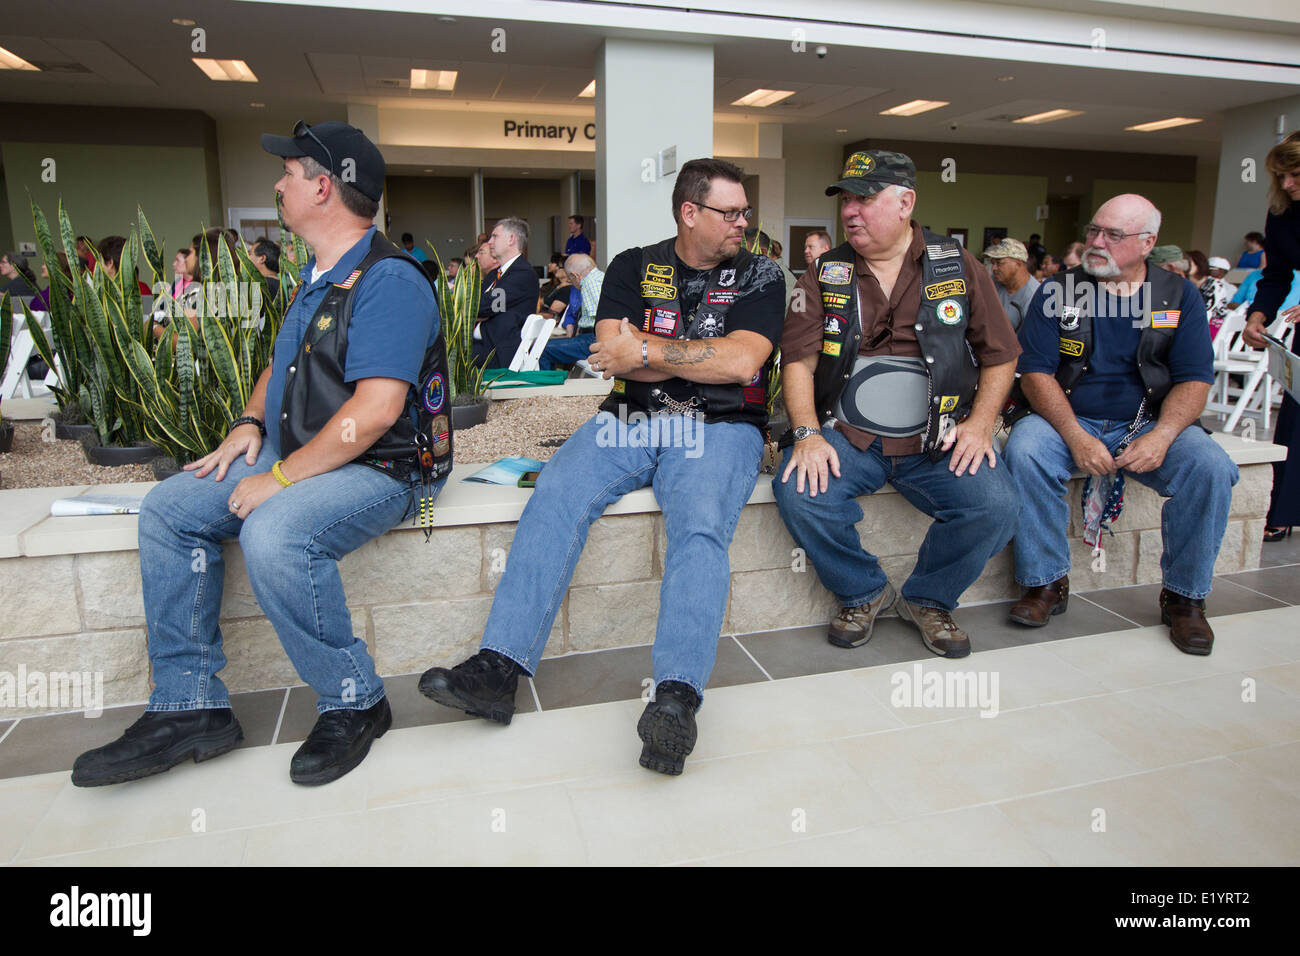 U.S. military veterans wait in the lobby area during grand opening of Veterans Administration outpatient clinic in Austin TX. Stock Photo